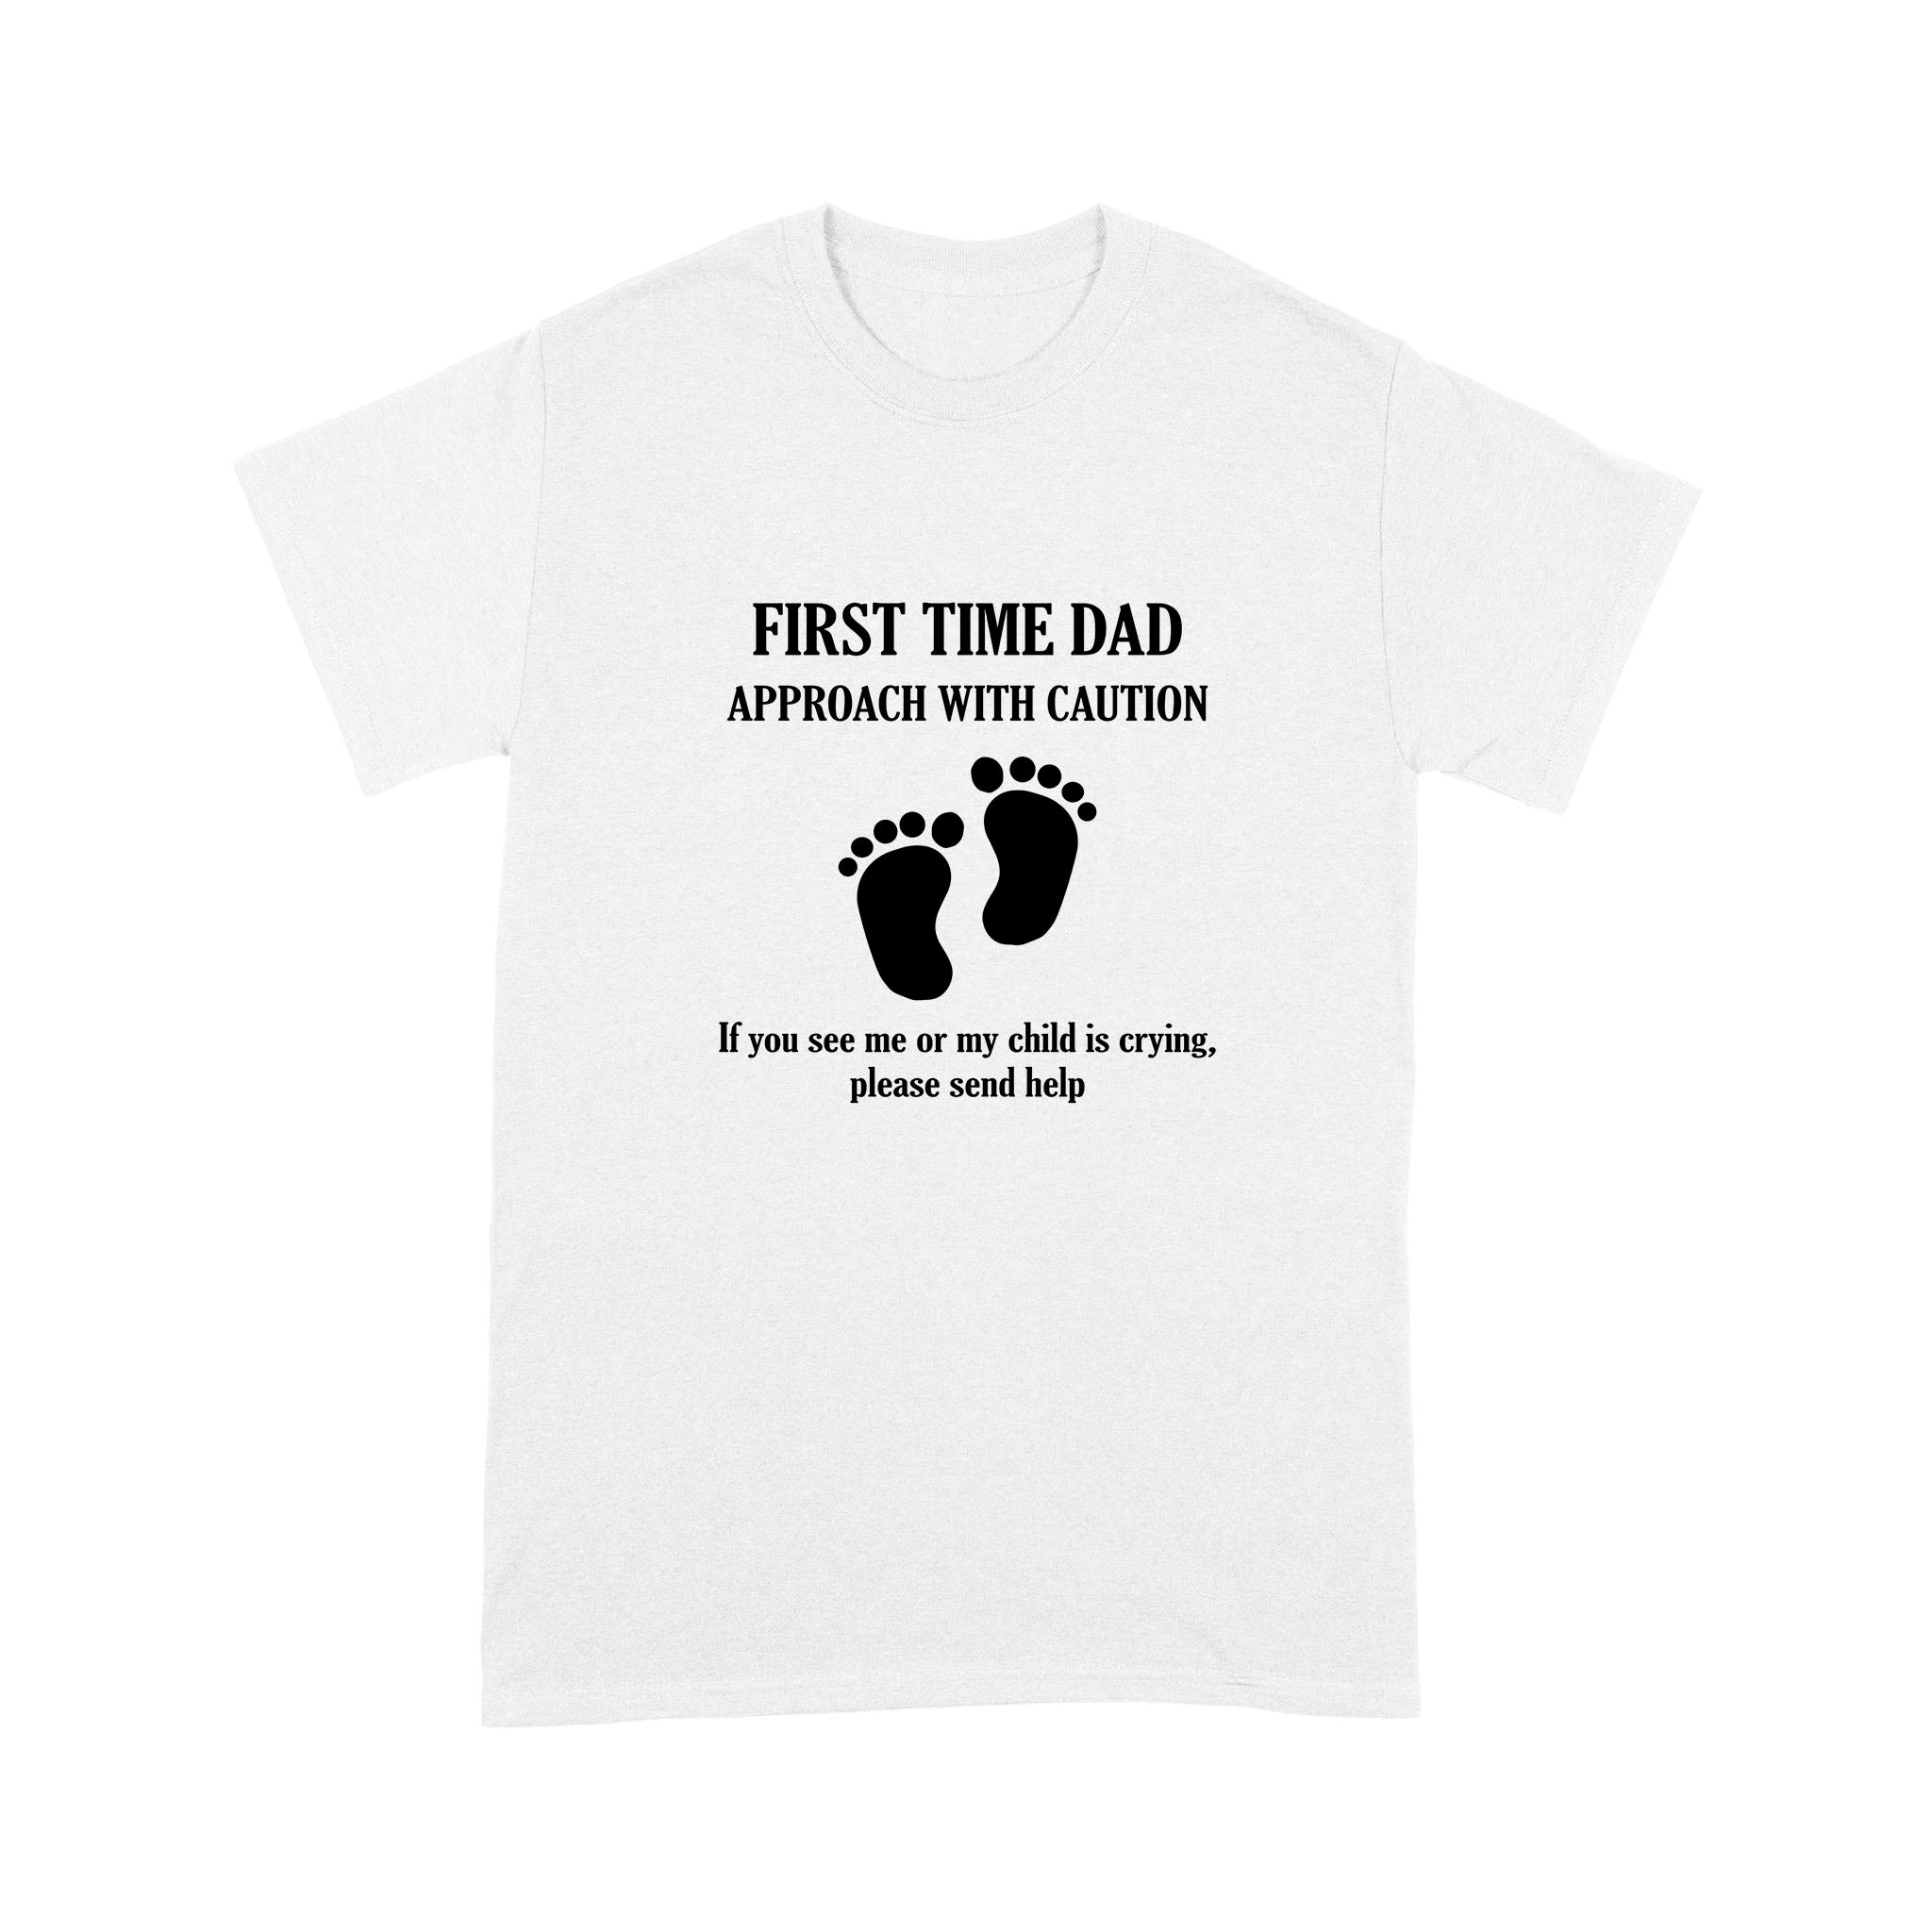 First time dad approach with caution T-Shirt, new dad shirts, promoted to dad shirt | NS15 Myfihu